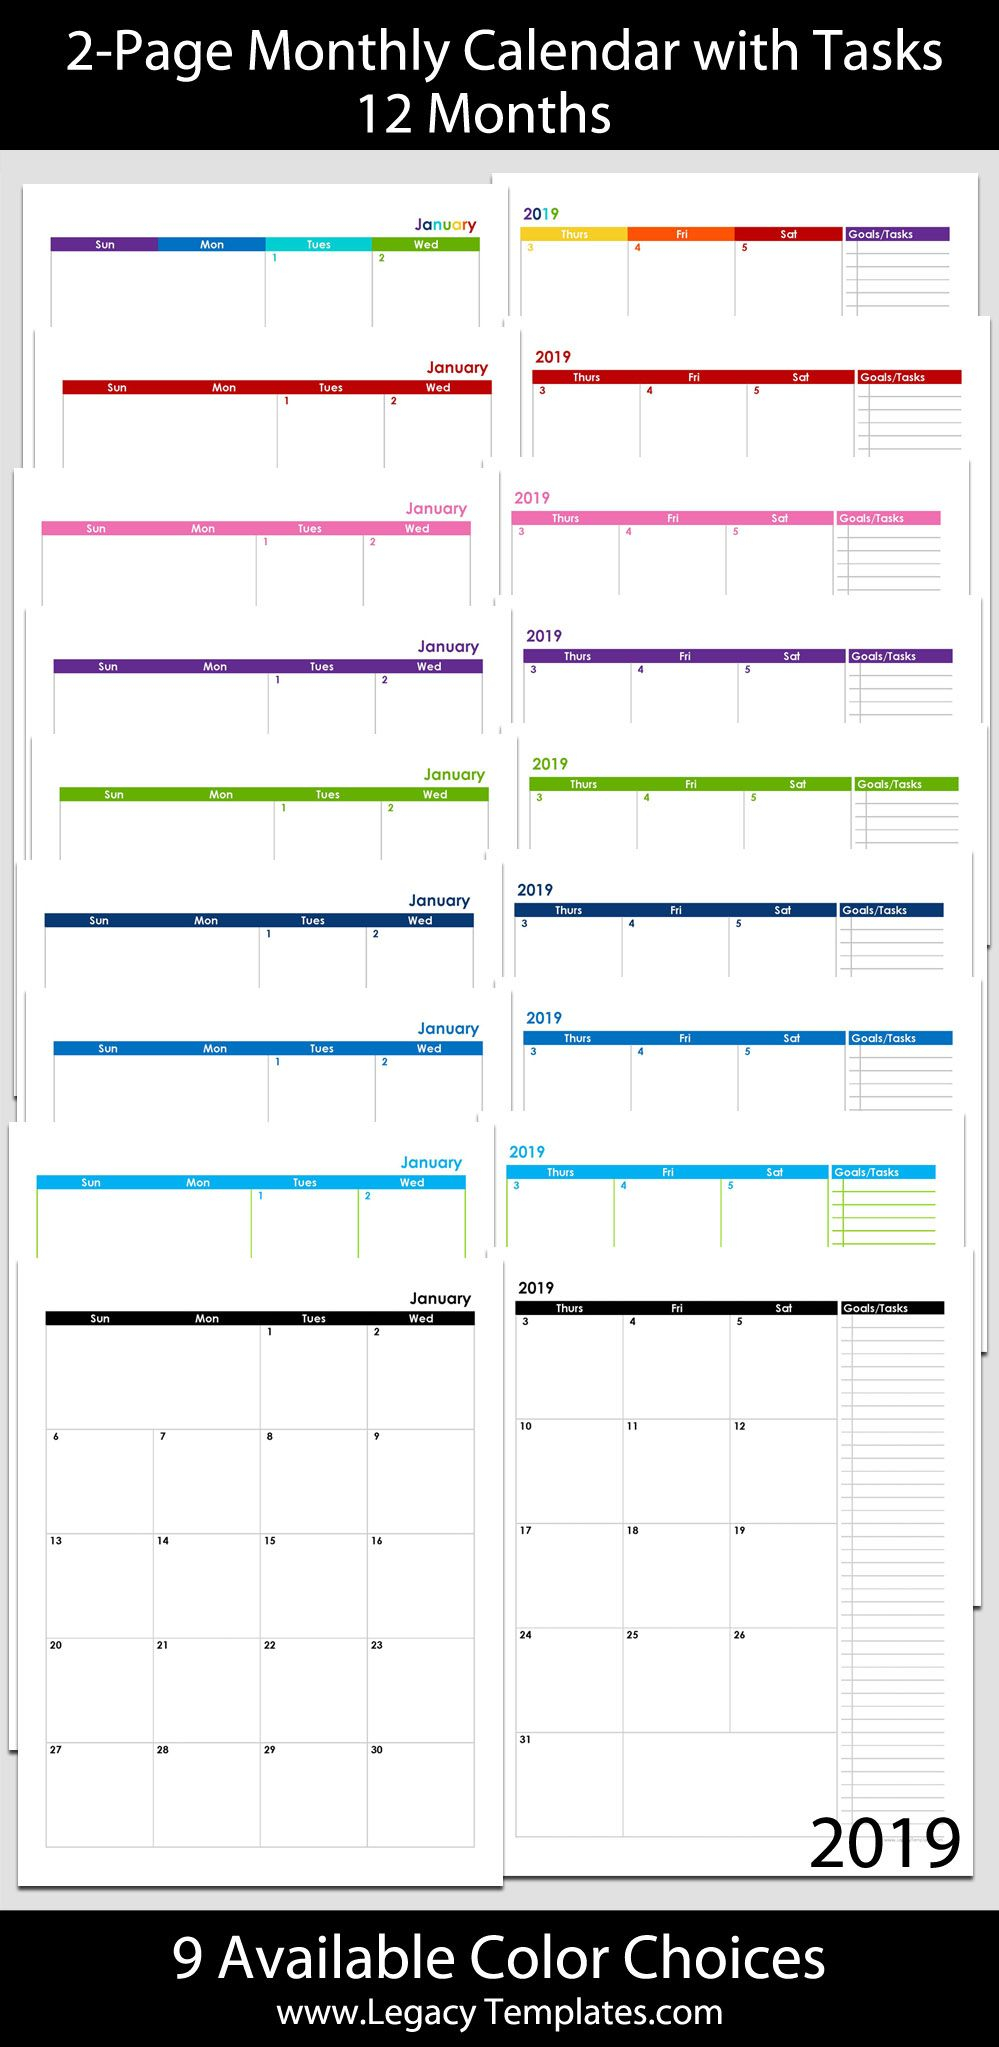 2019 12 Month 2 Page Calendar 8 5 X 11 | Legacy Templates